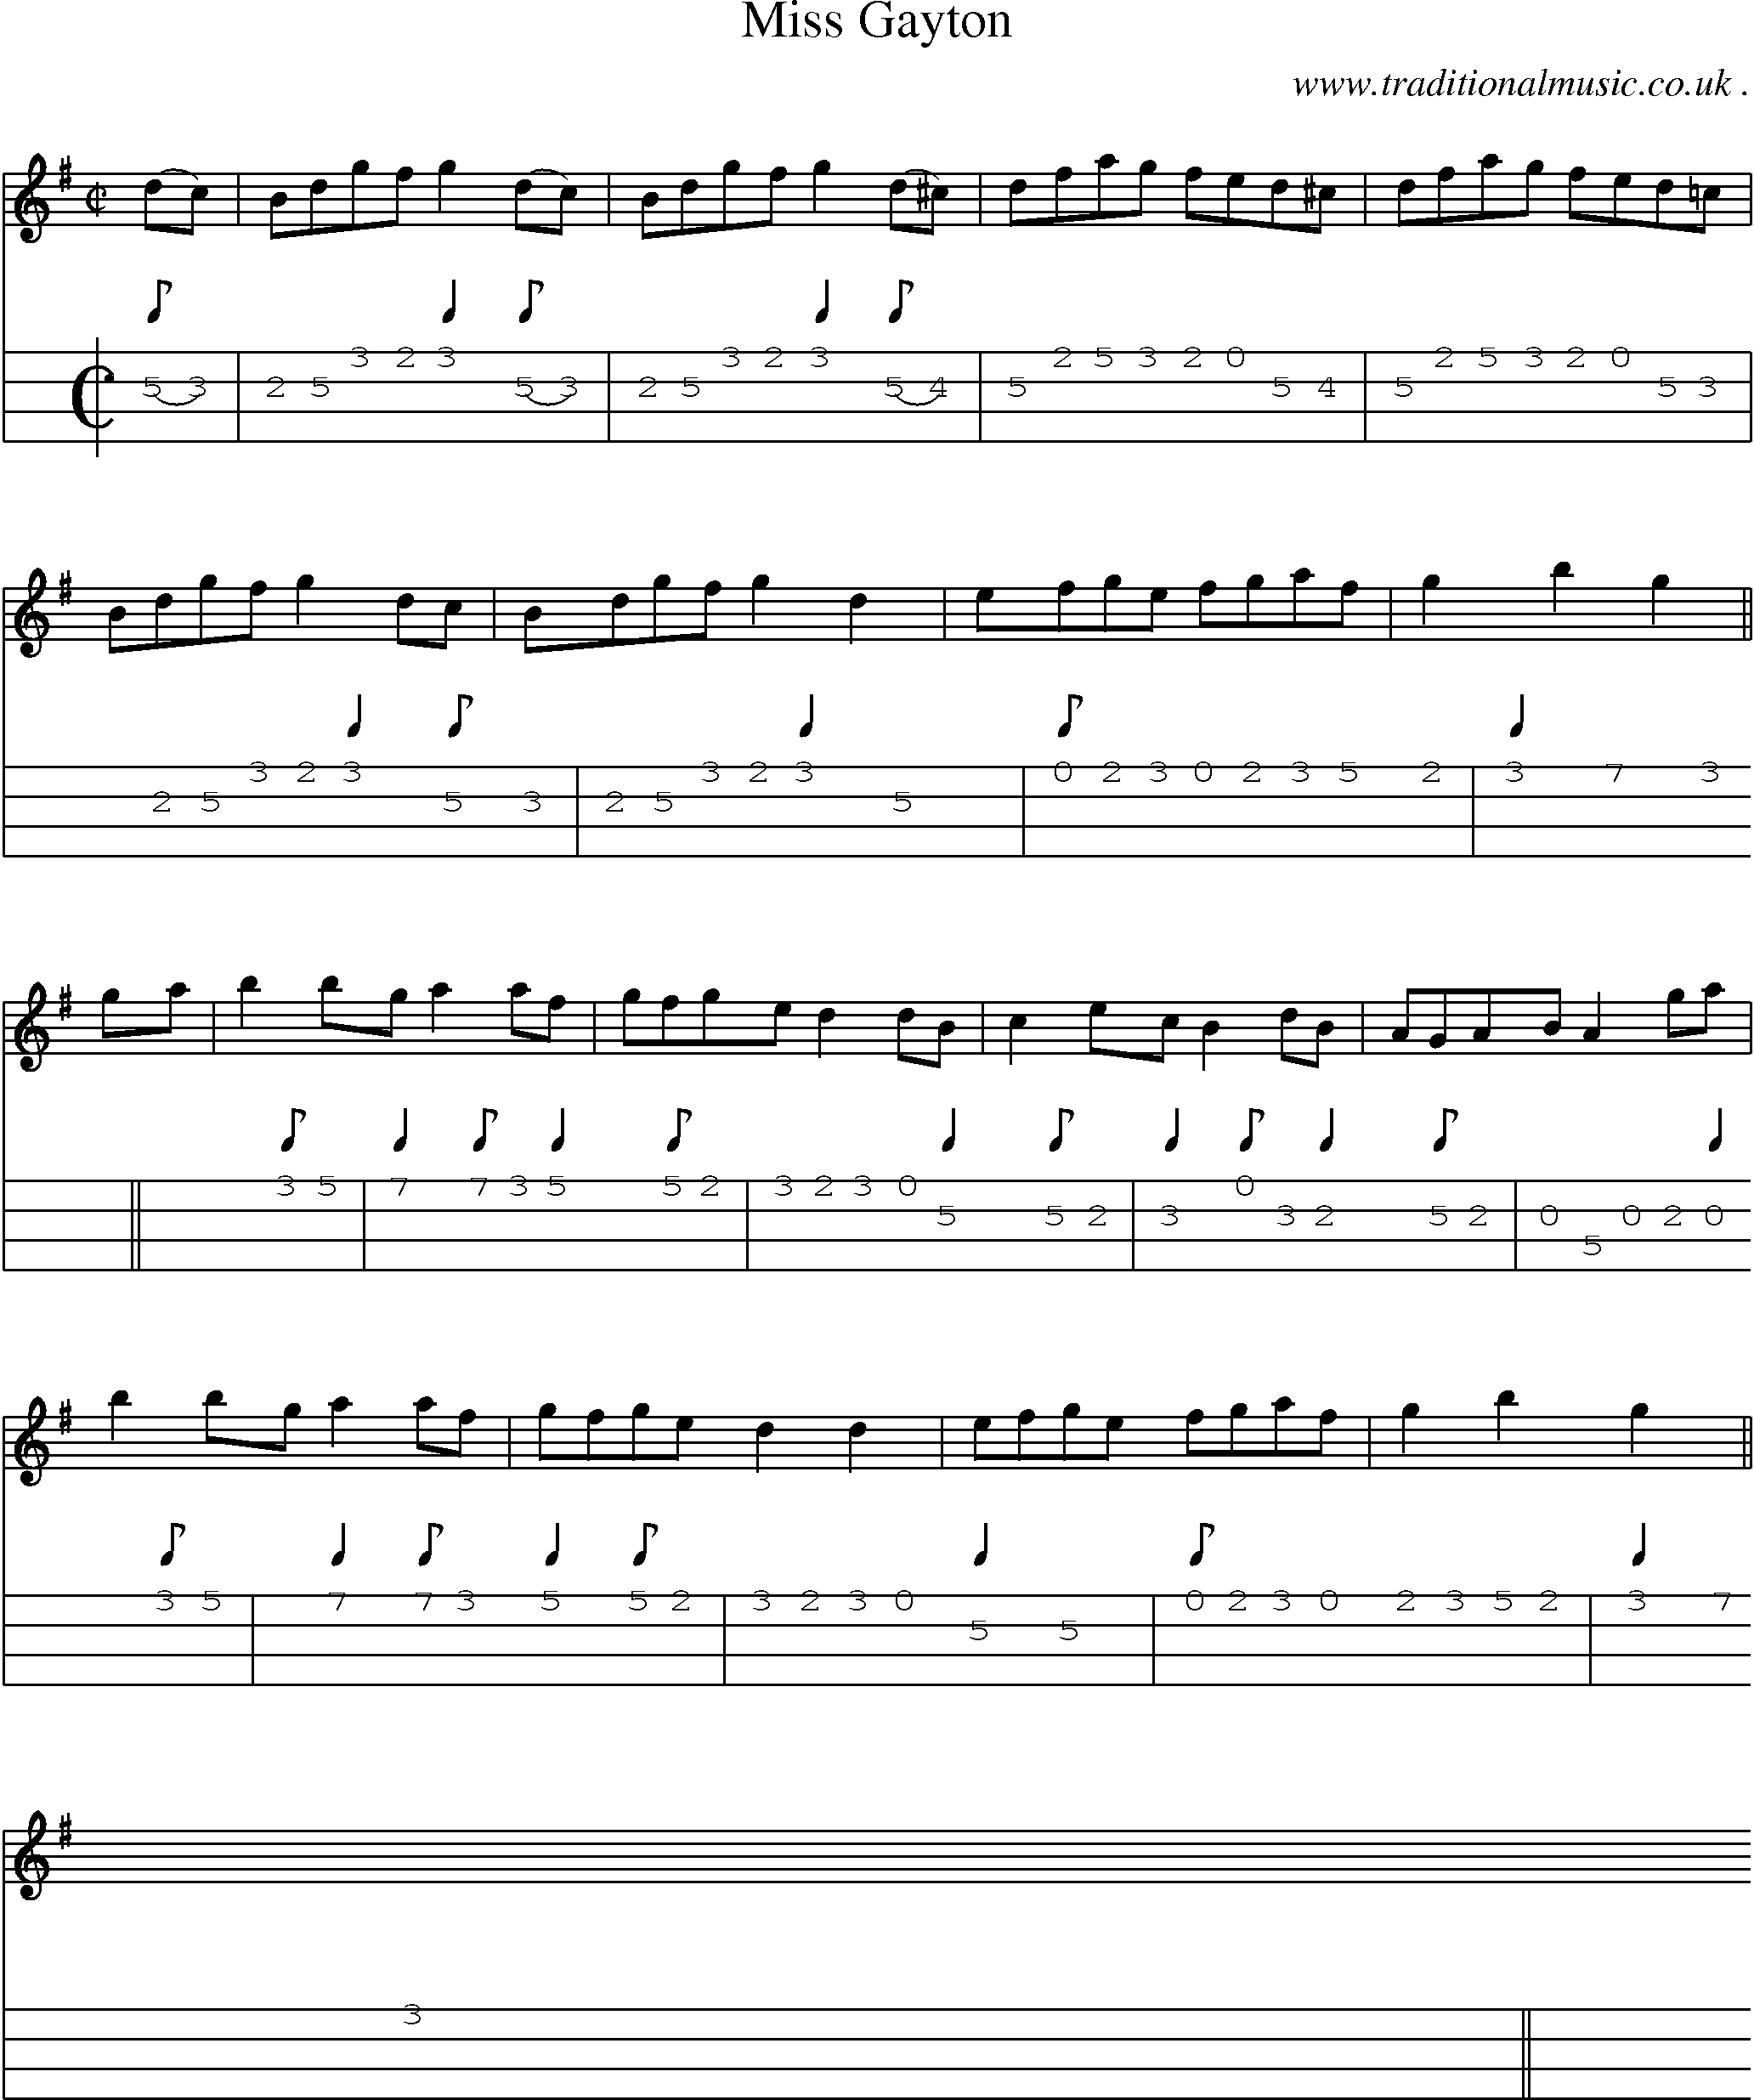 Sheet-music  score, Chords and Mandolin Tabs for Miss Gayton